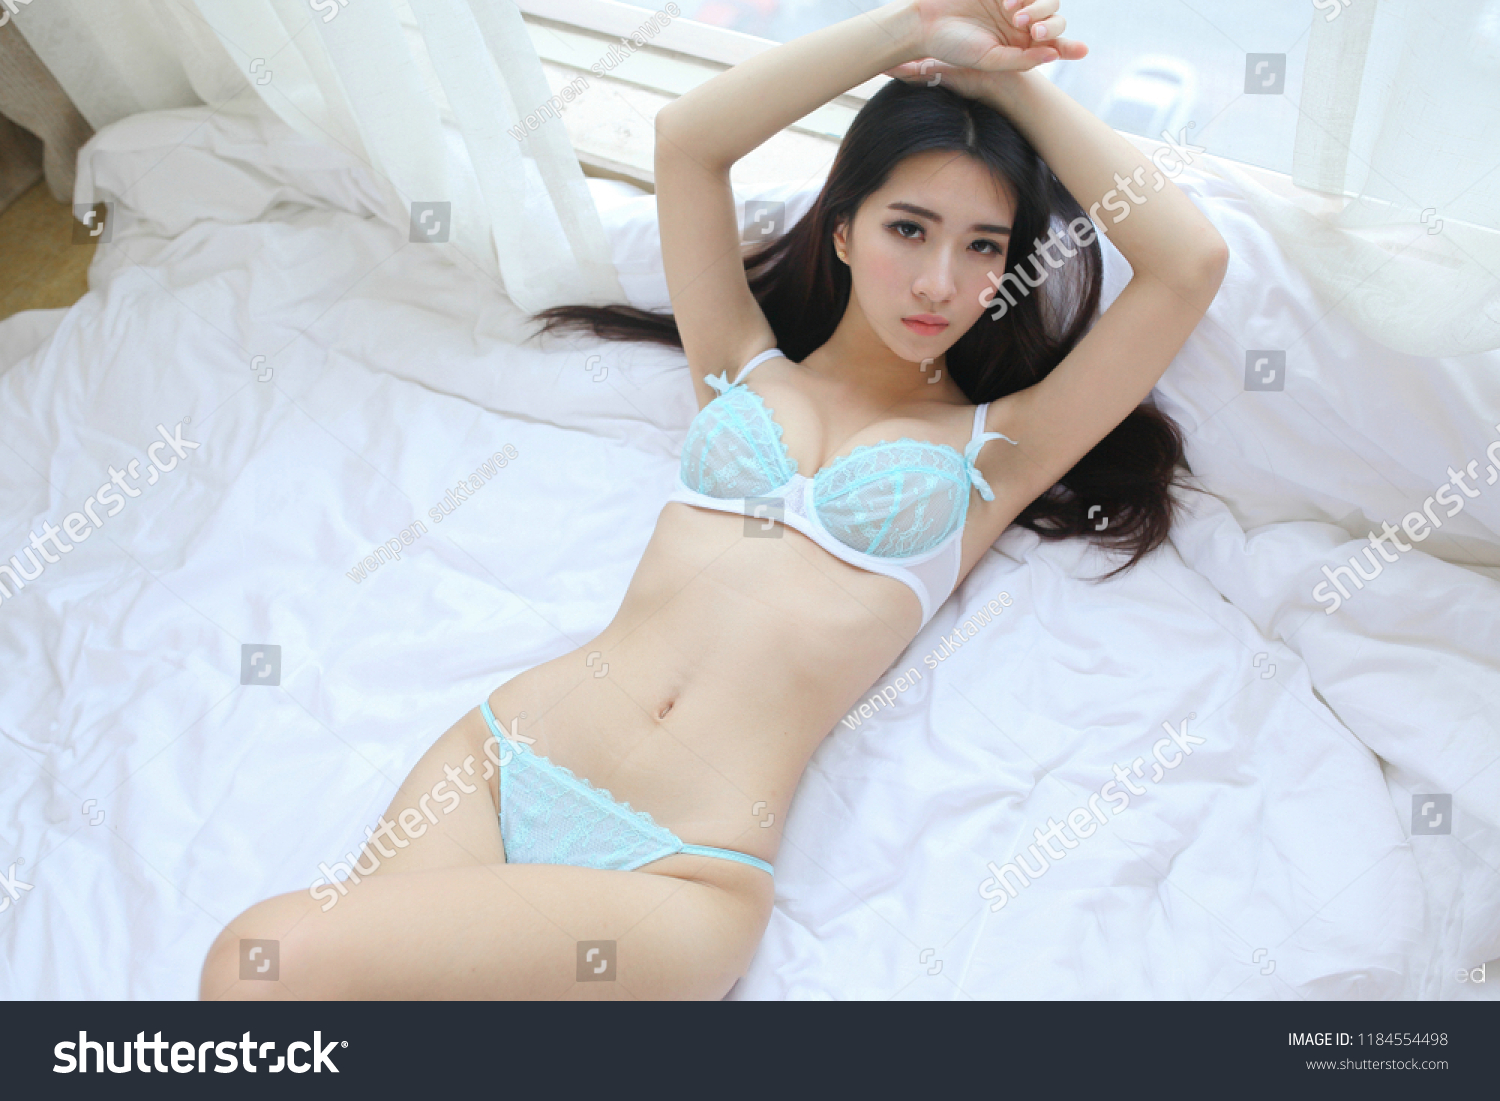 Hot young asian girl nude - Sex photo